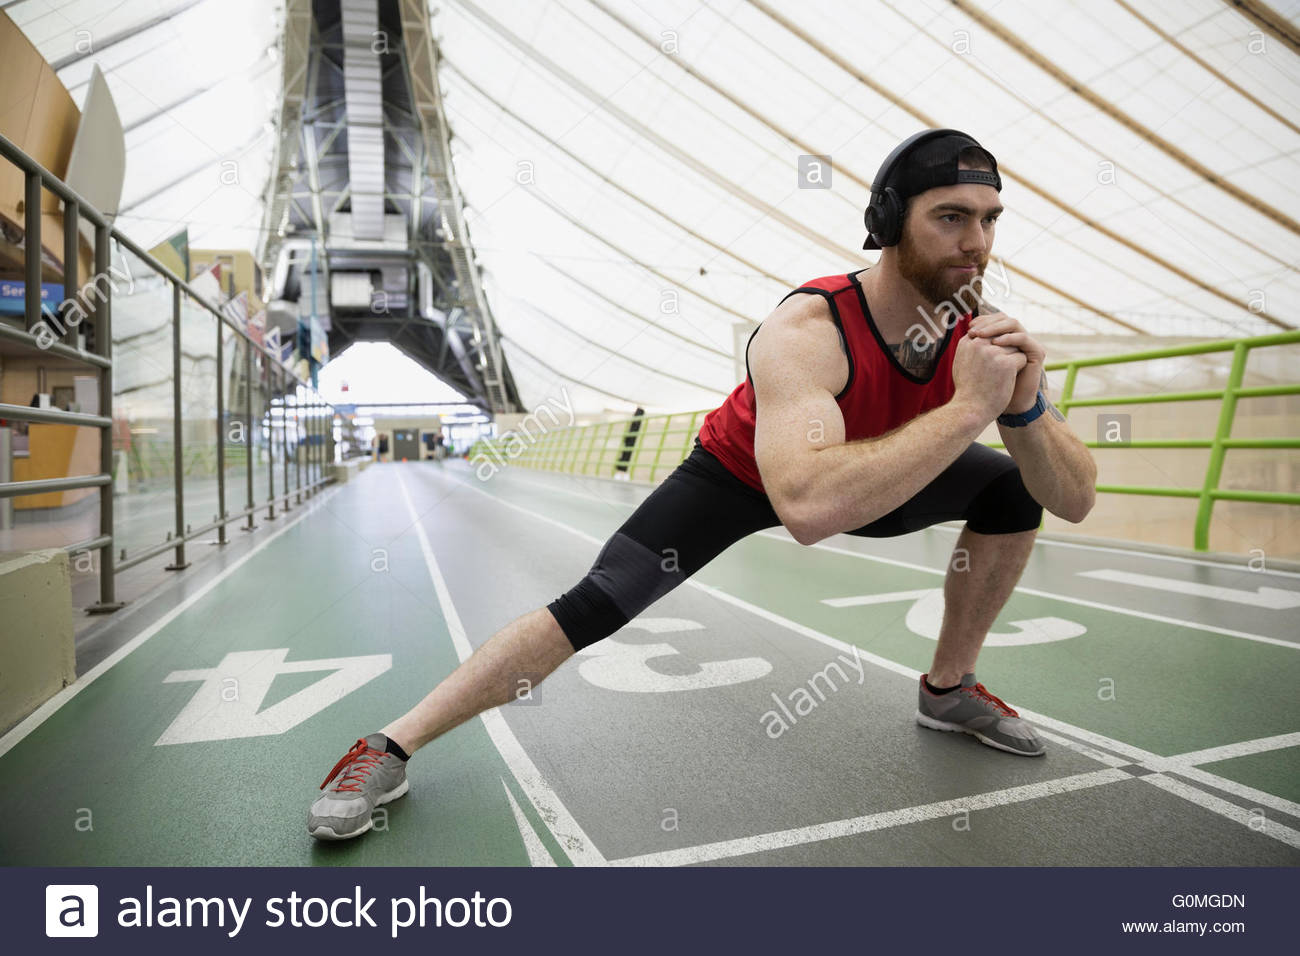 Runner doing side lunge stretch on indoor track Stock Photo